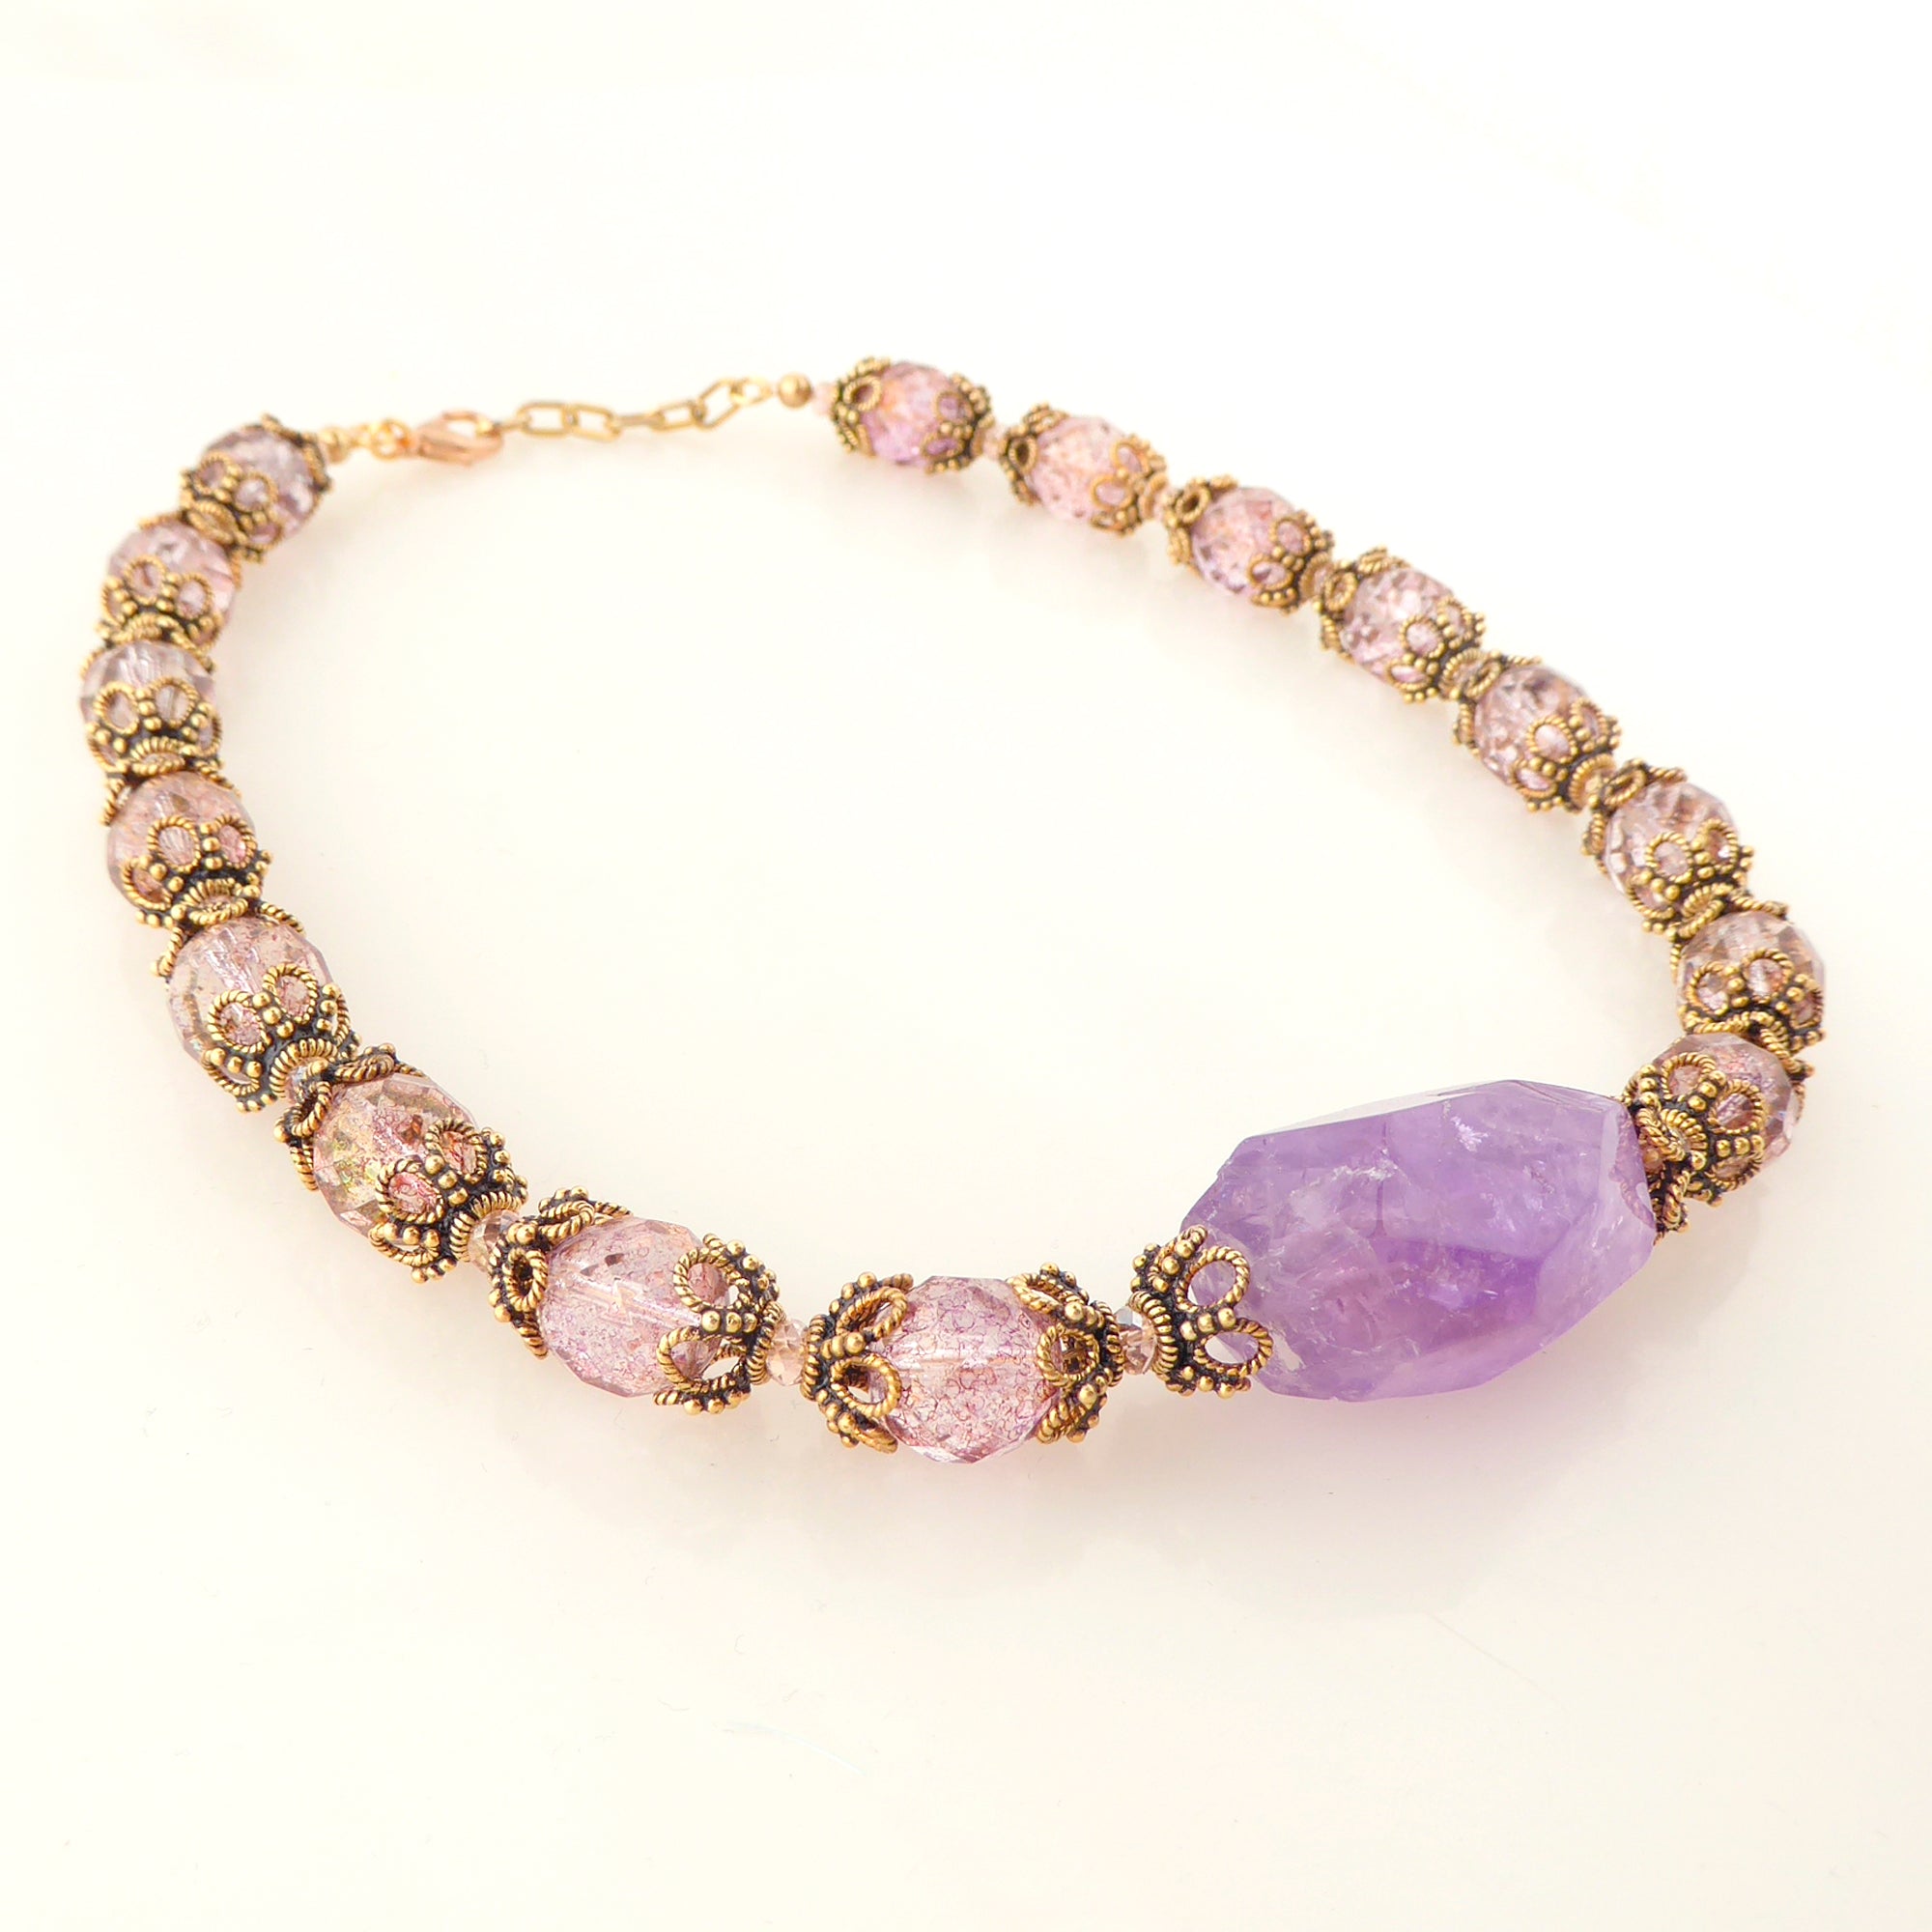 Amethyst rococo necklace by Jenny Dayco 2